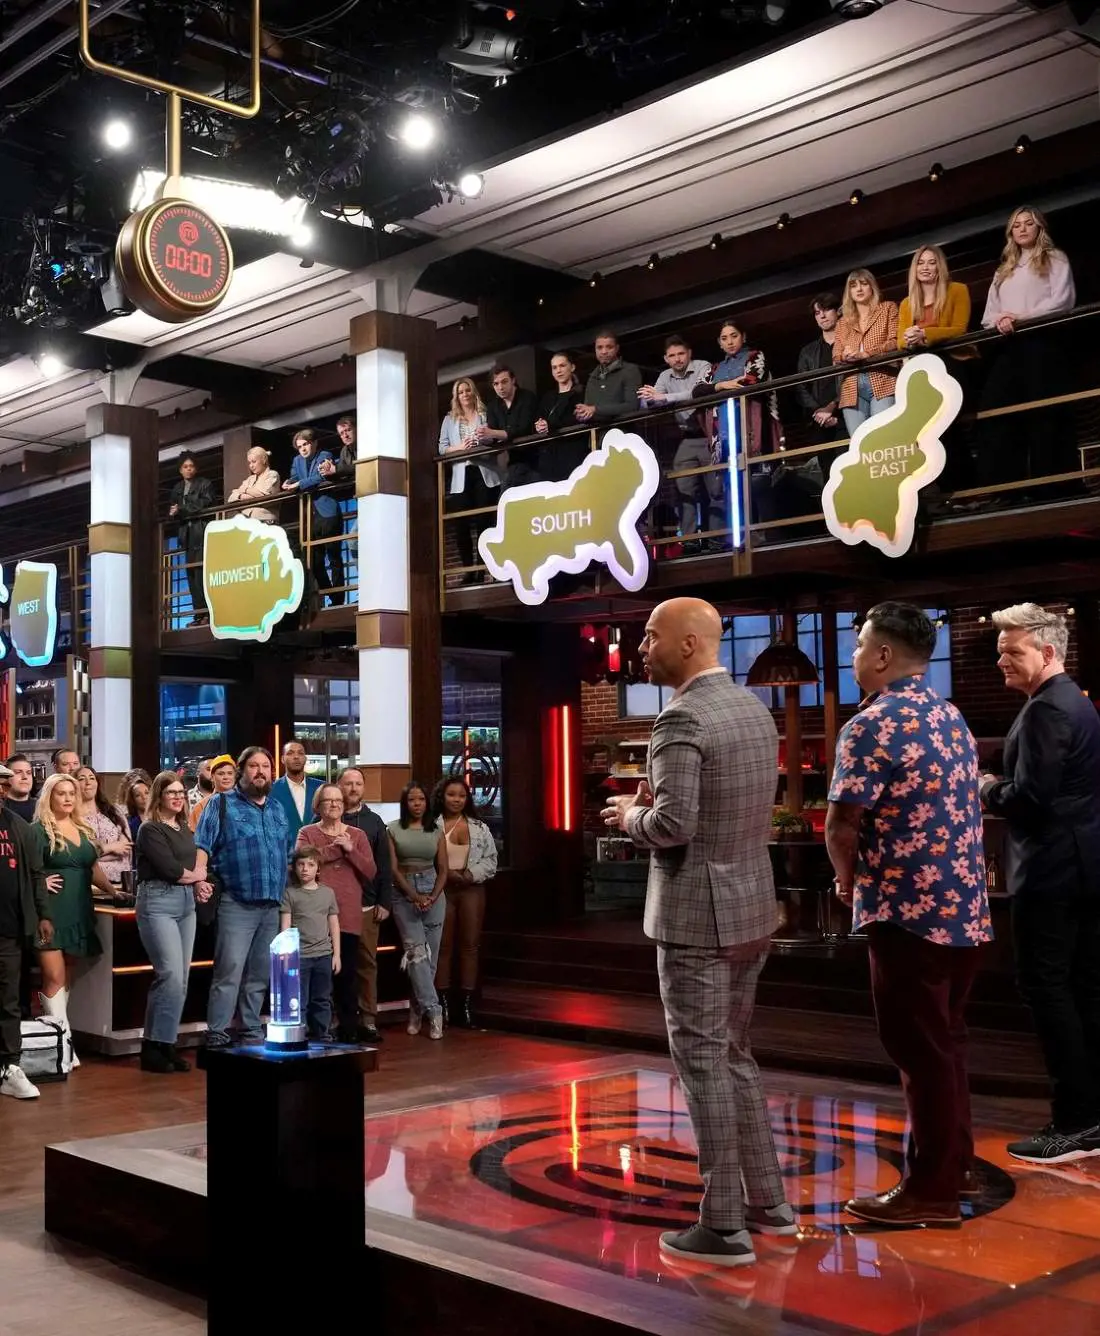 Officially known as United Tastes of America, MasterChef Season 13 will divide the contestants based on regions -West, Northeast, Midwest, and South